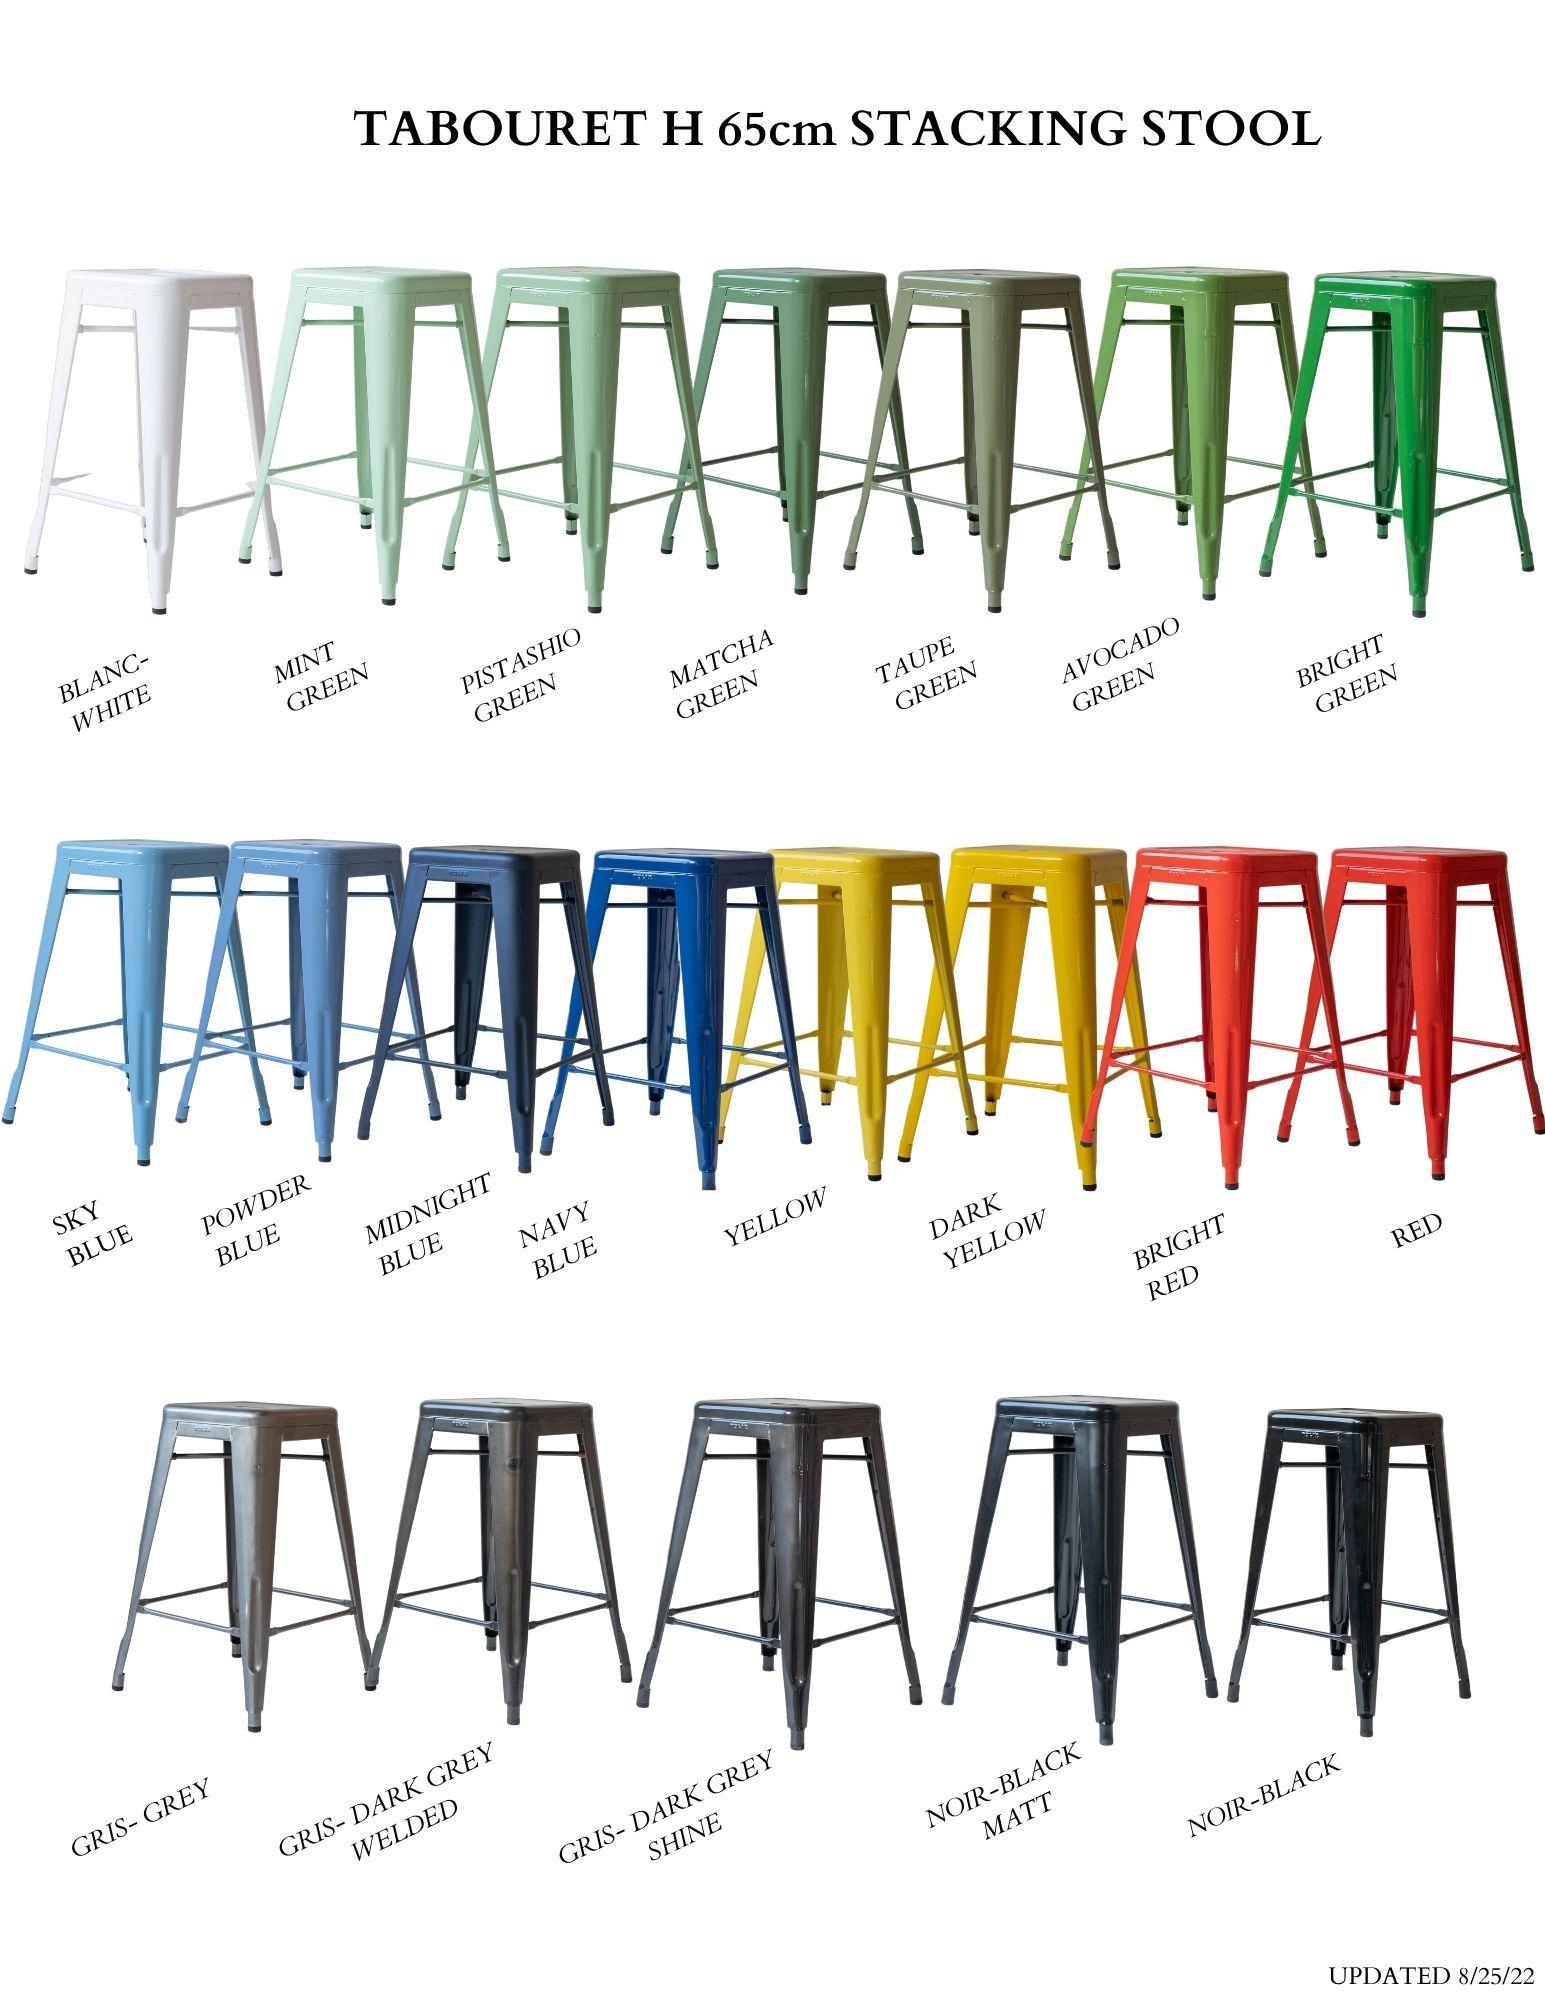 Contemporary Tolix Made in France Steel Stacking Stools 100's in Stock, Most Colors Available For Sale